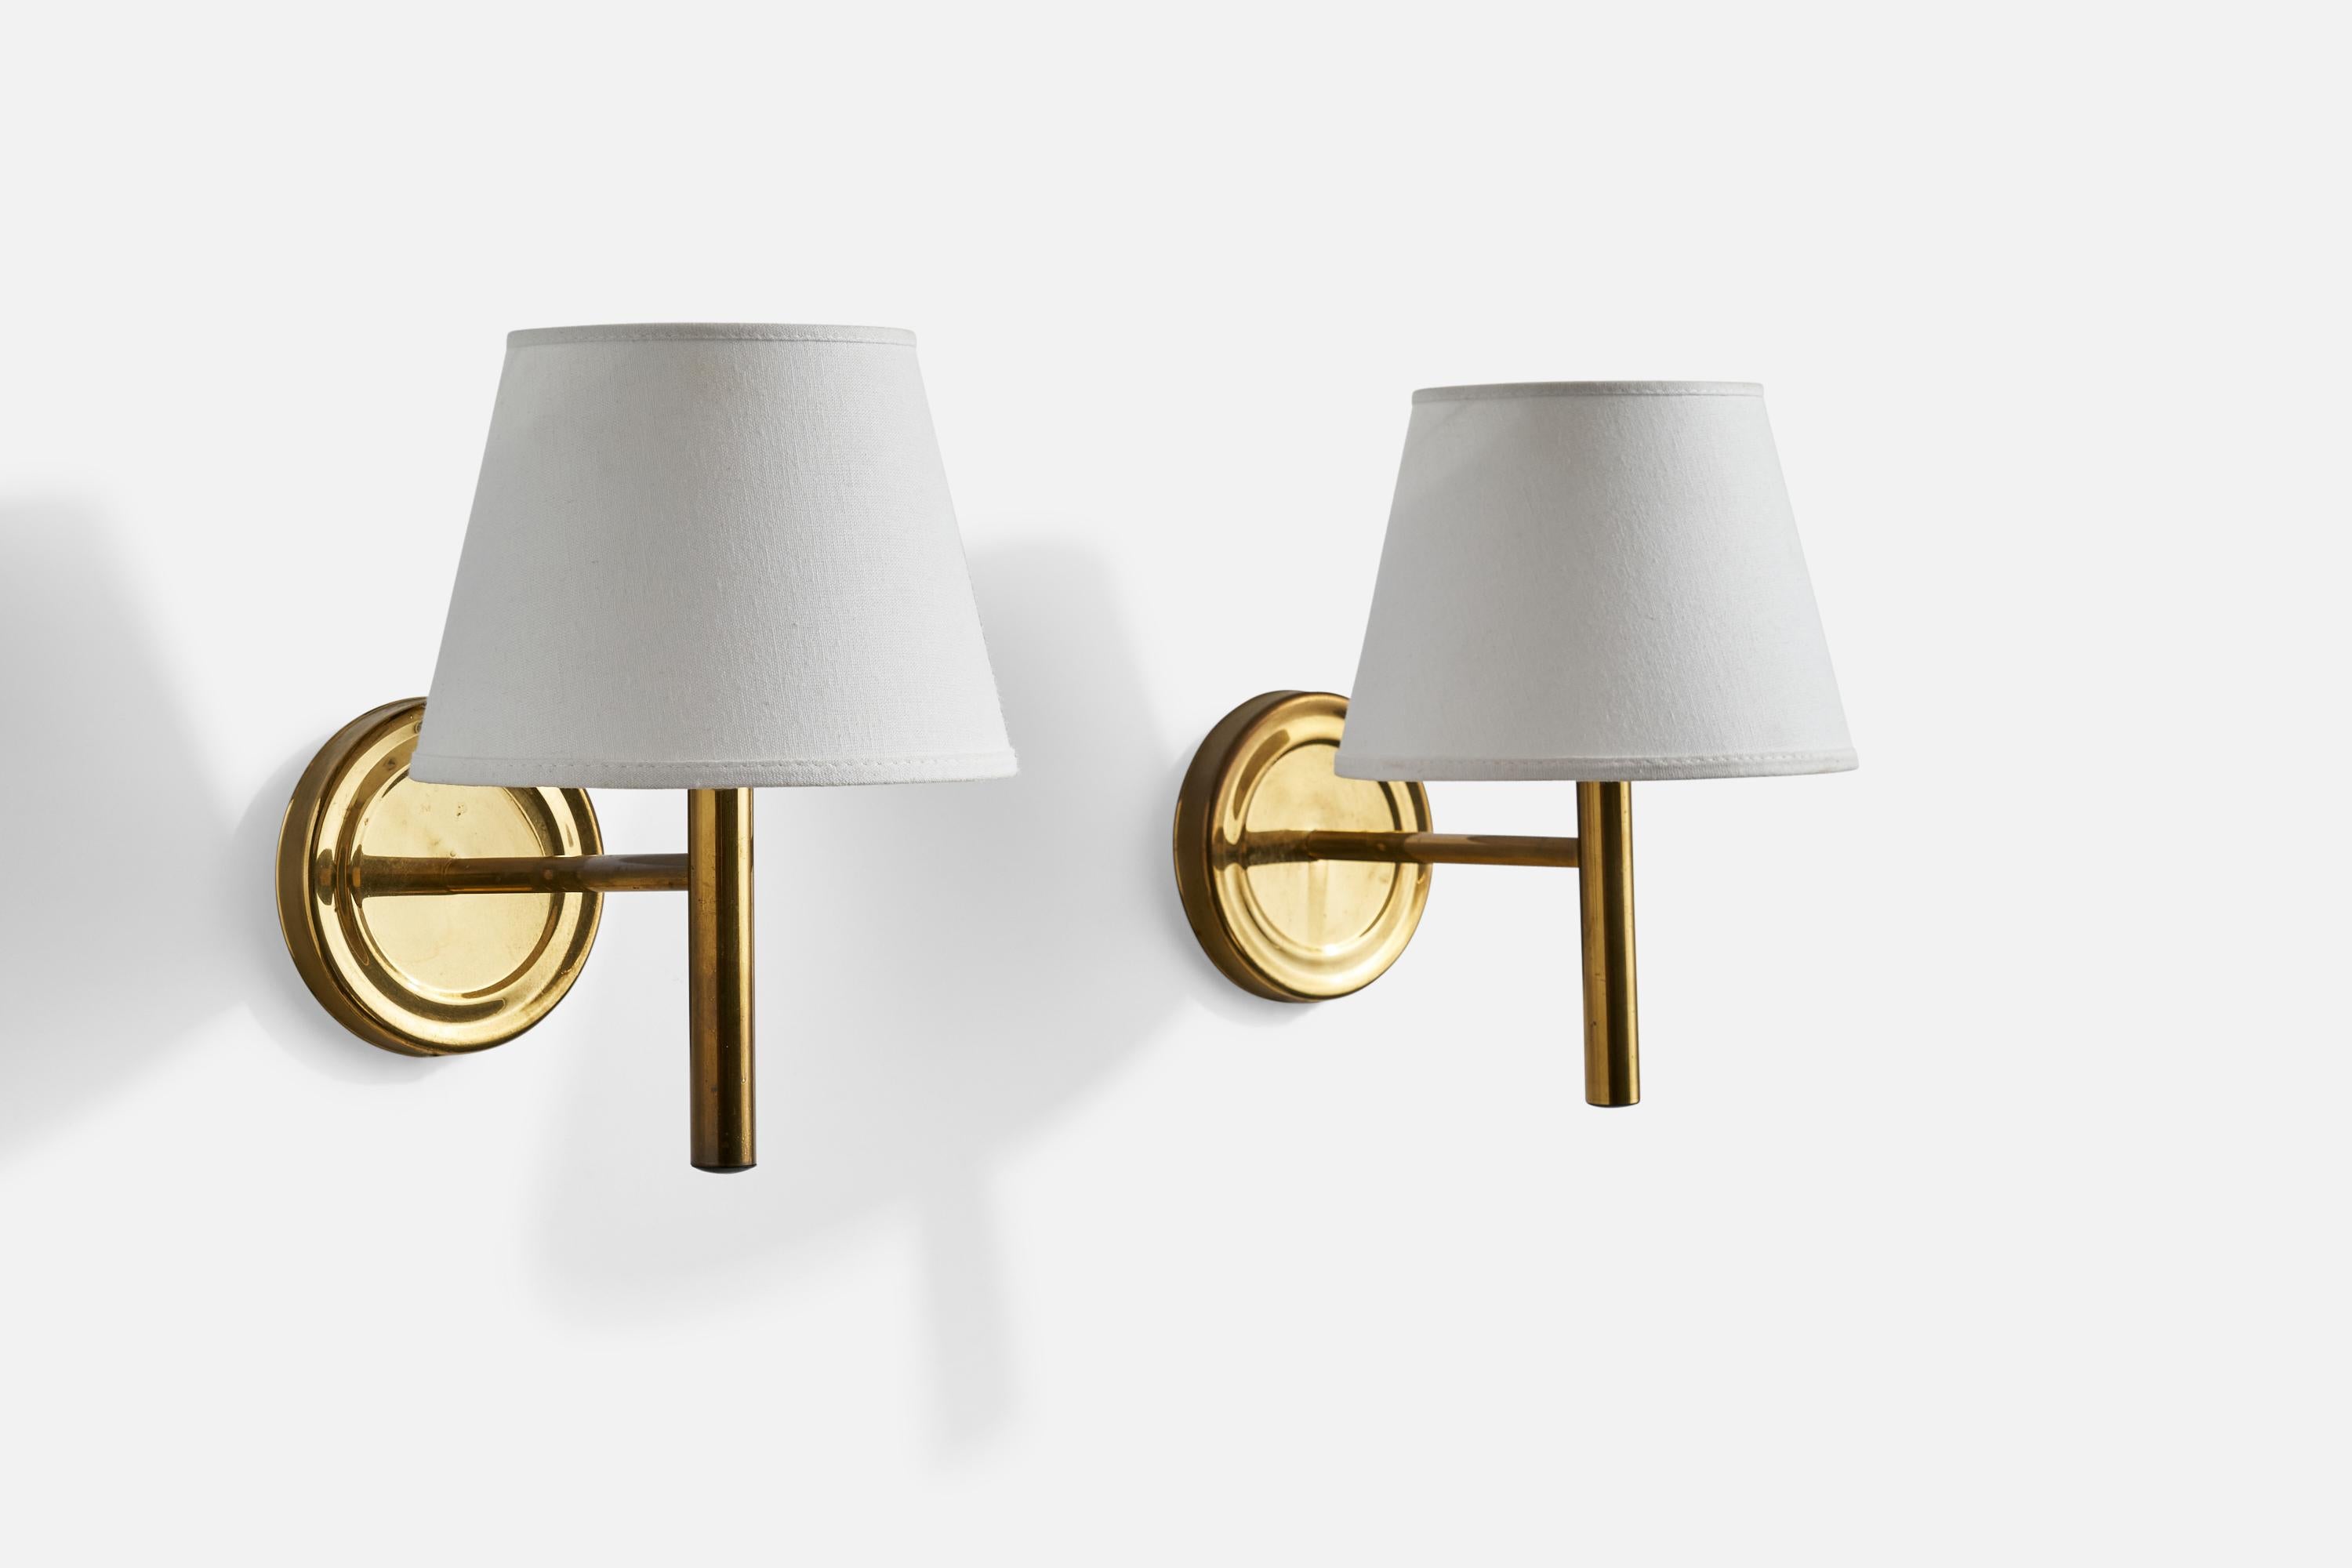 A pair of brass and white fabric wall lights designed and produced by Abo Randers, Denmark, c. 1960s.